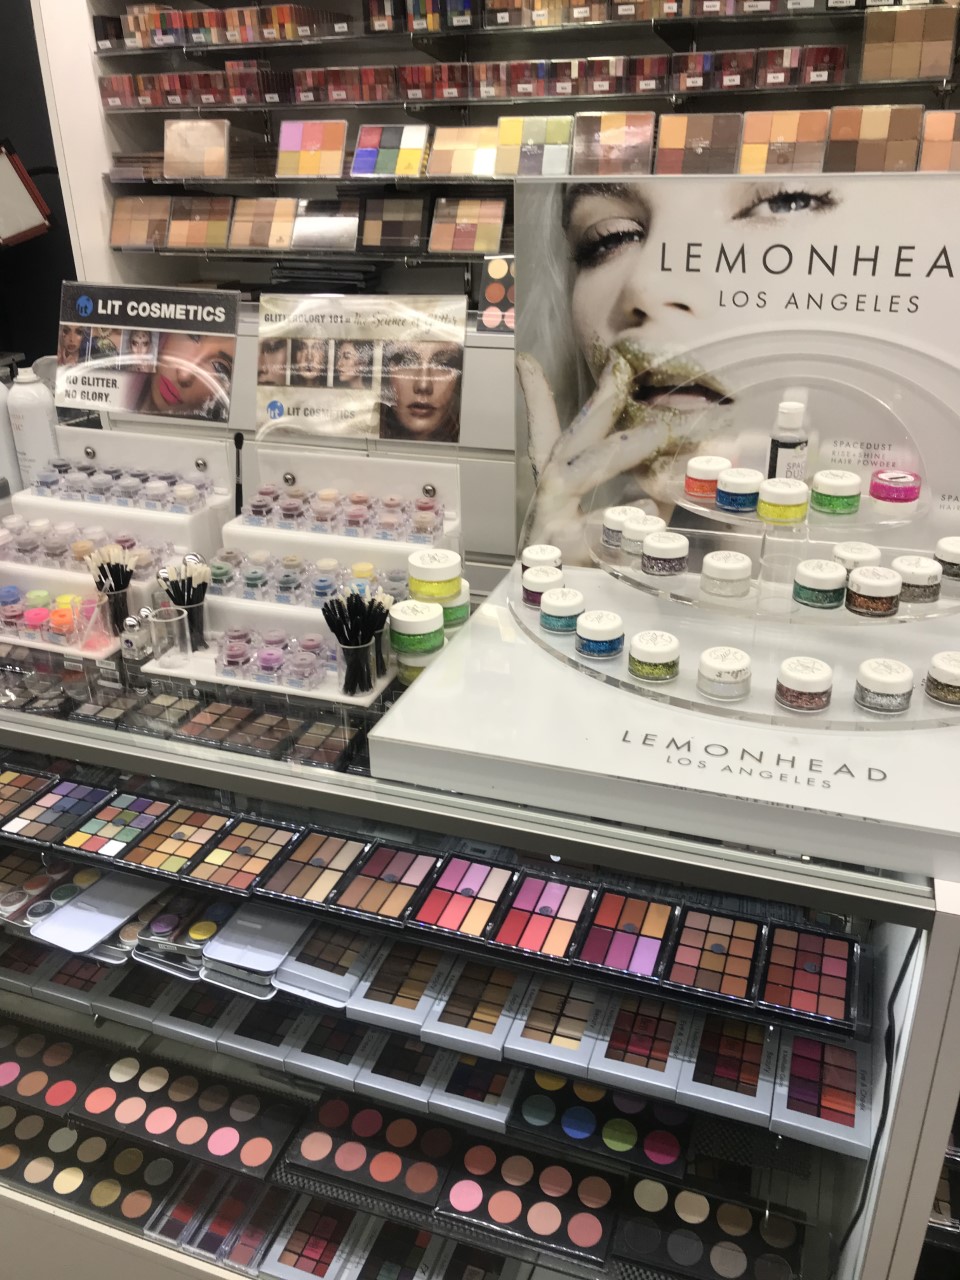 Differences Between Shopping in Sephora USA vs Sephora Europe - Mariana In  LA